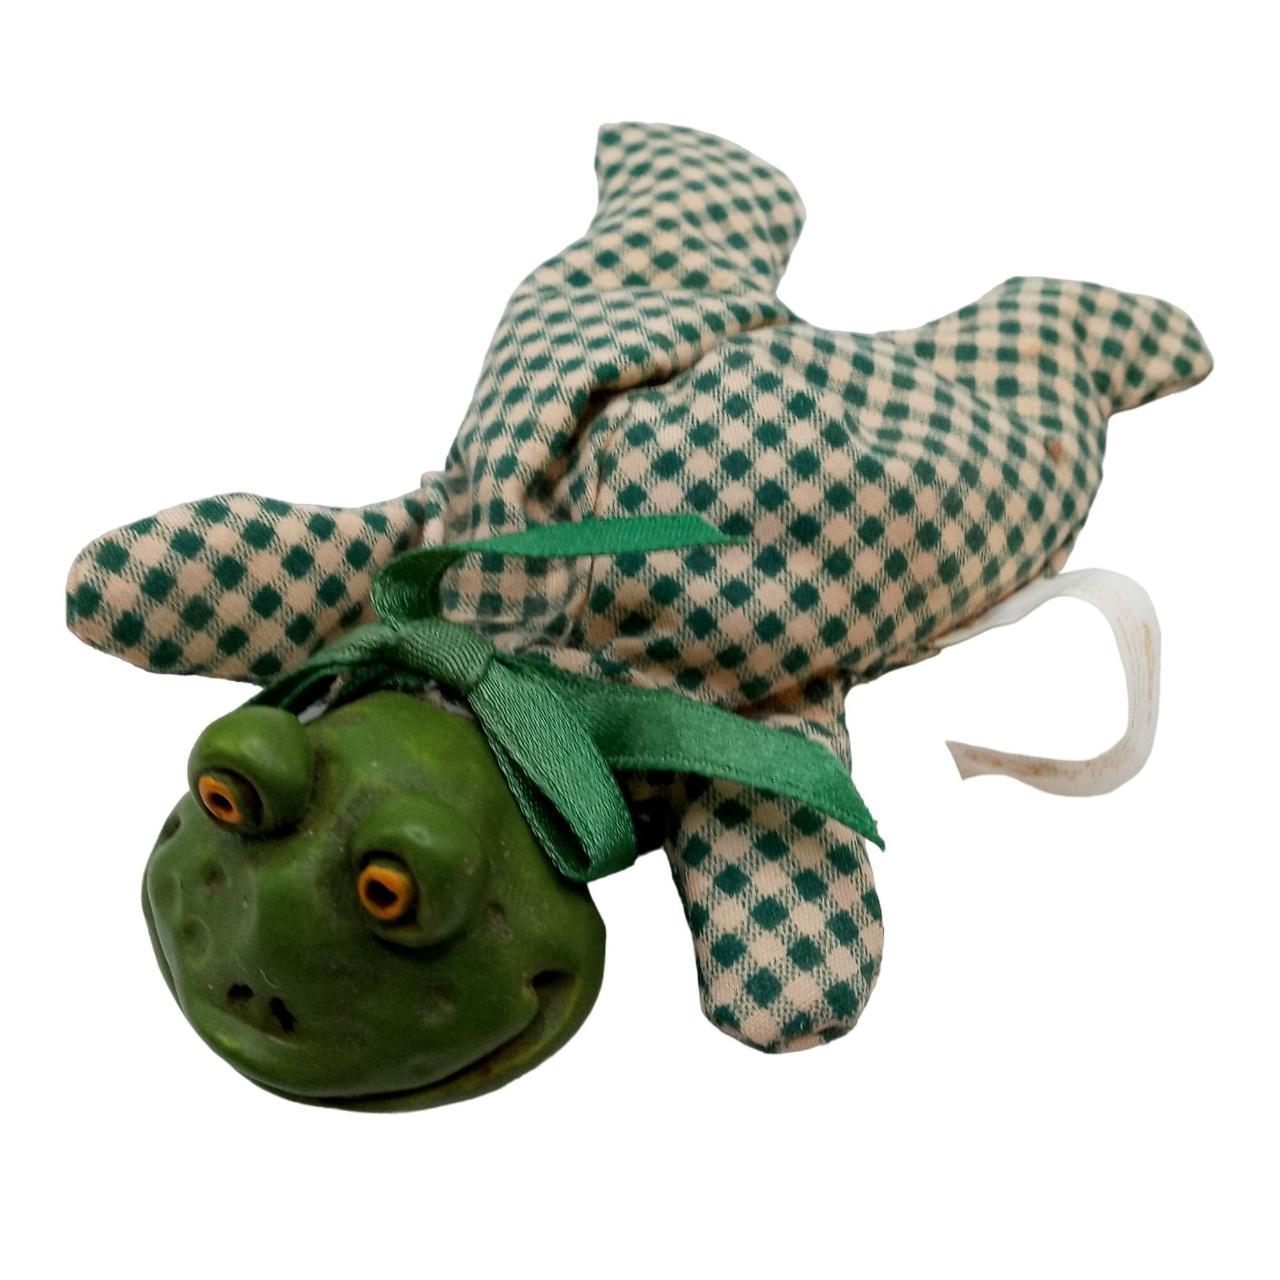 Gingham Plaid Frog Bean Bag Resin Collectible Figure